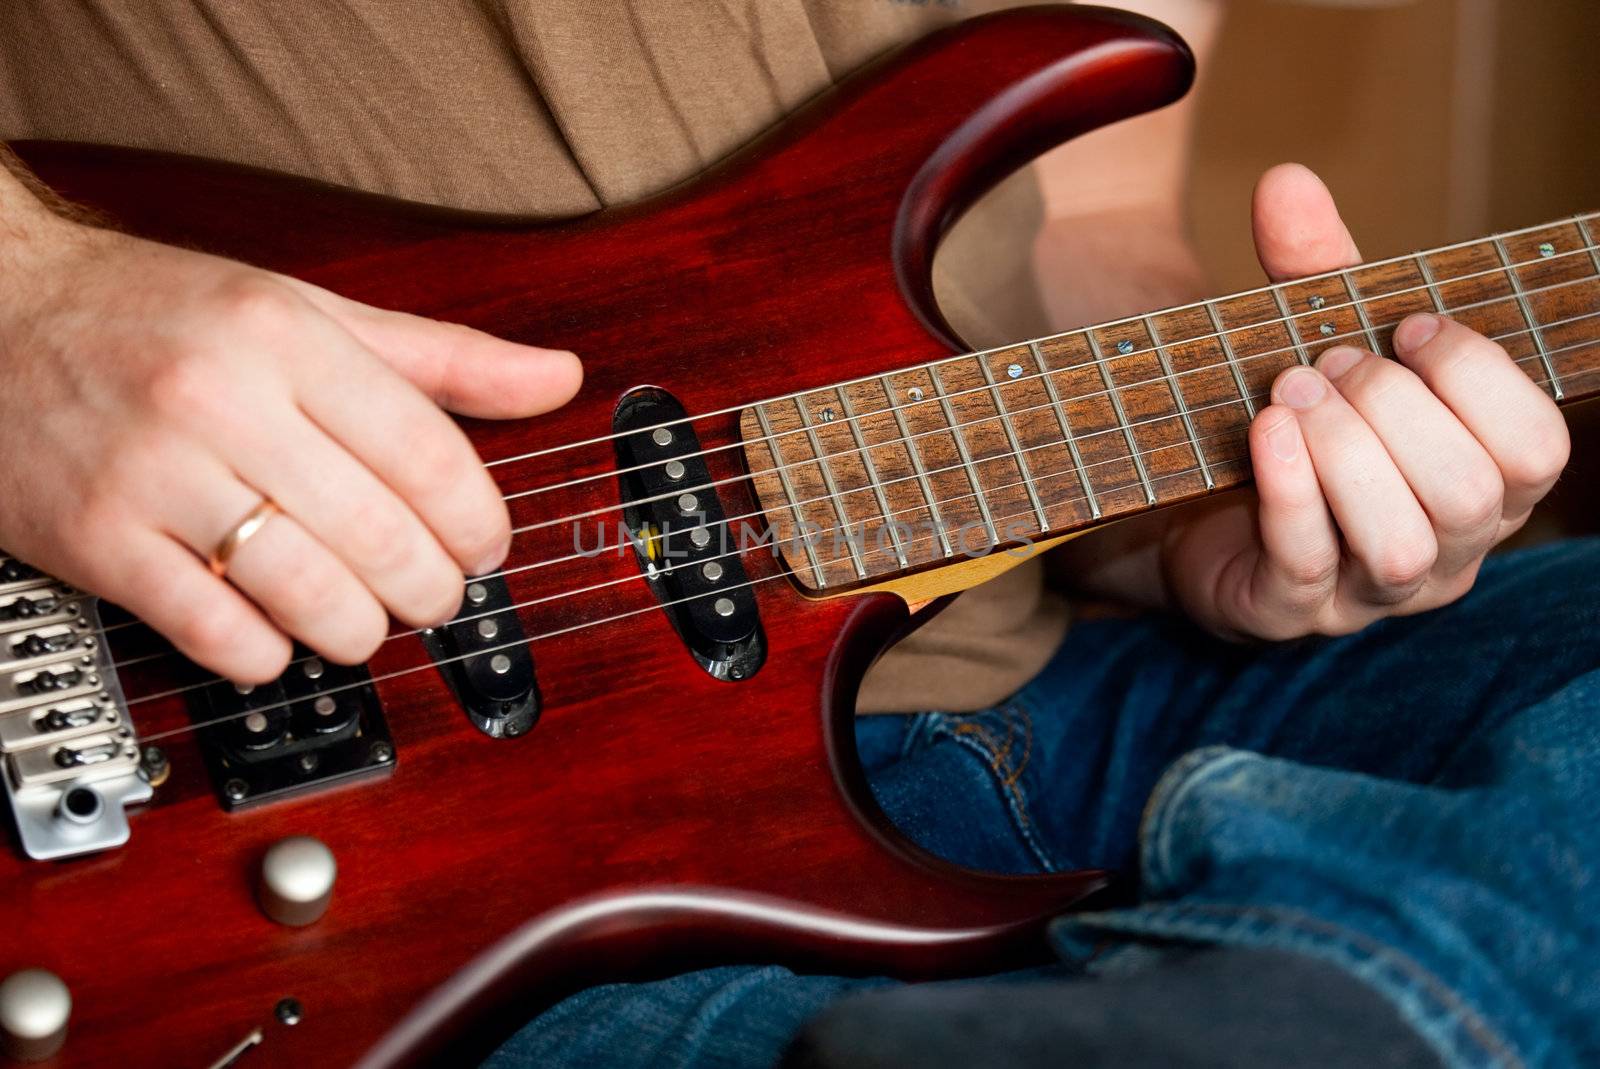 Musician playing an electric guitar cropped